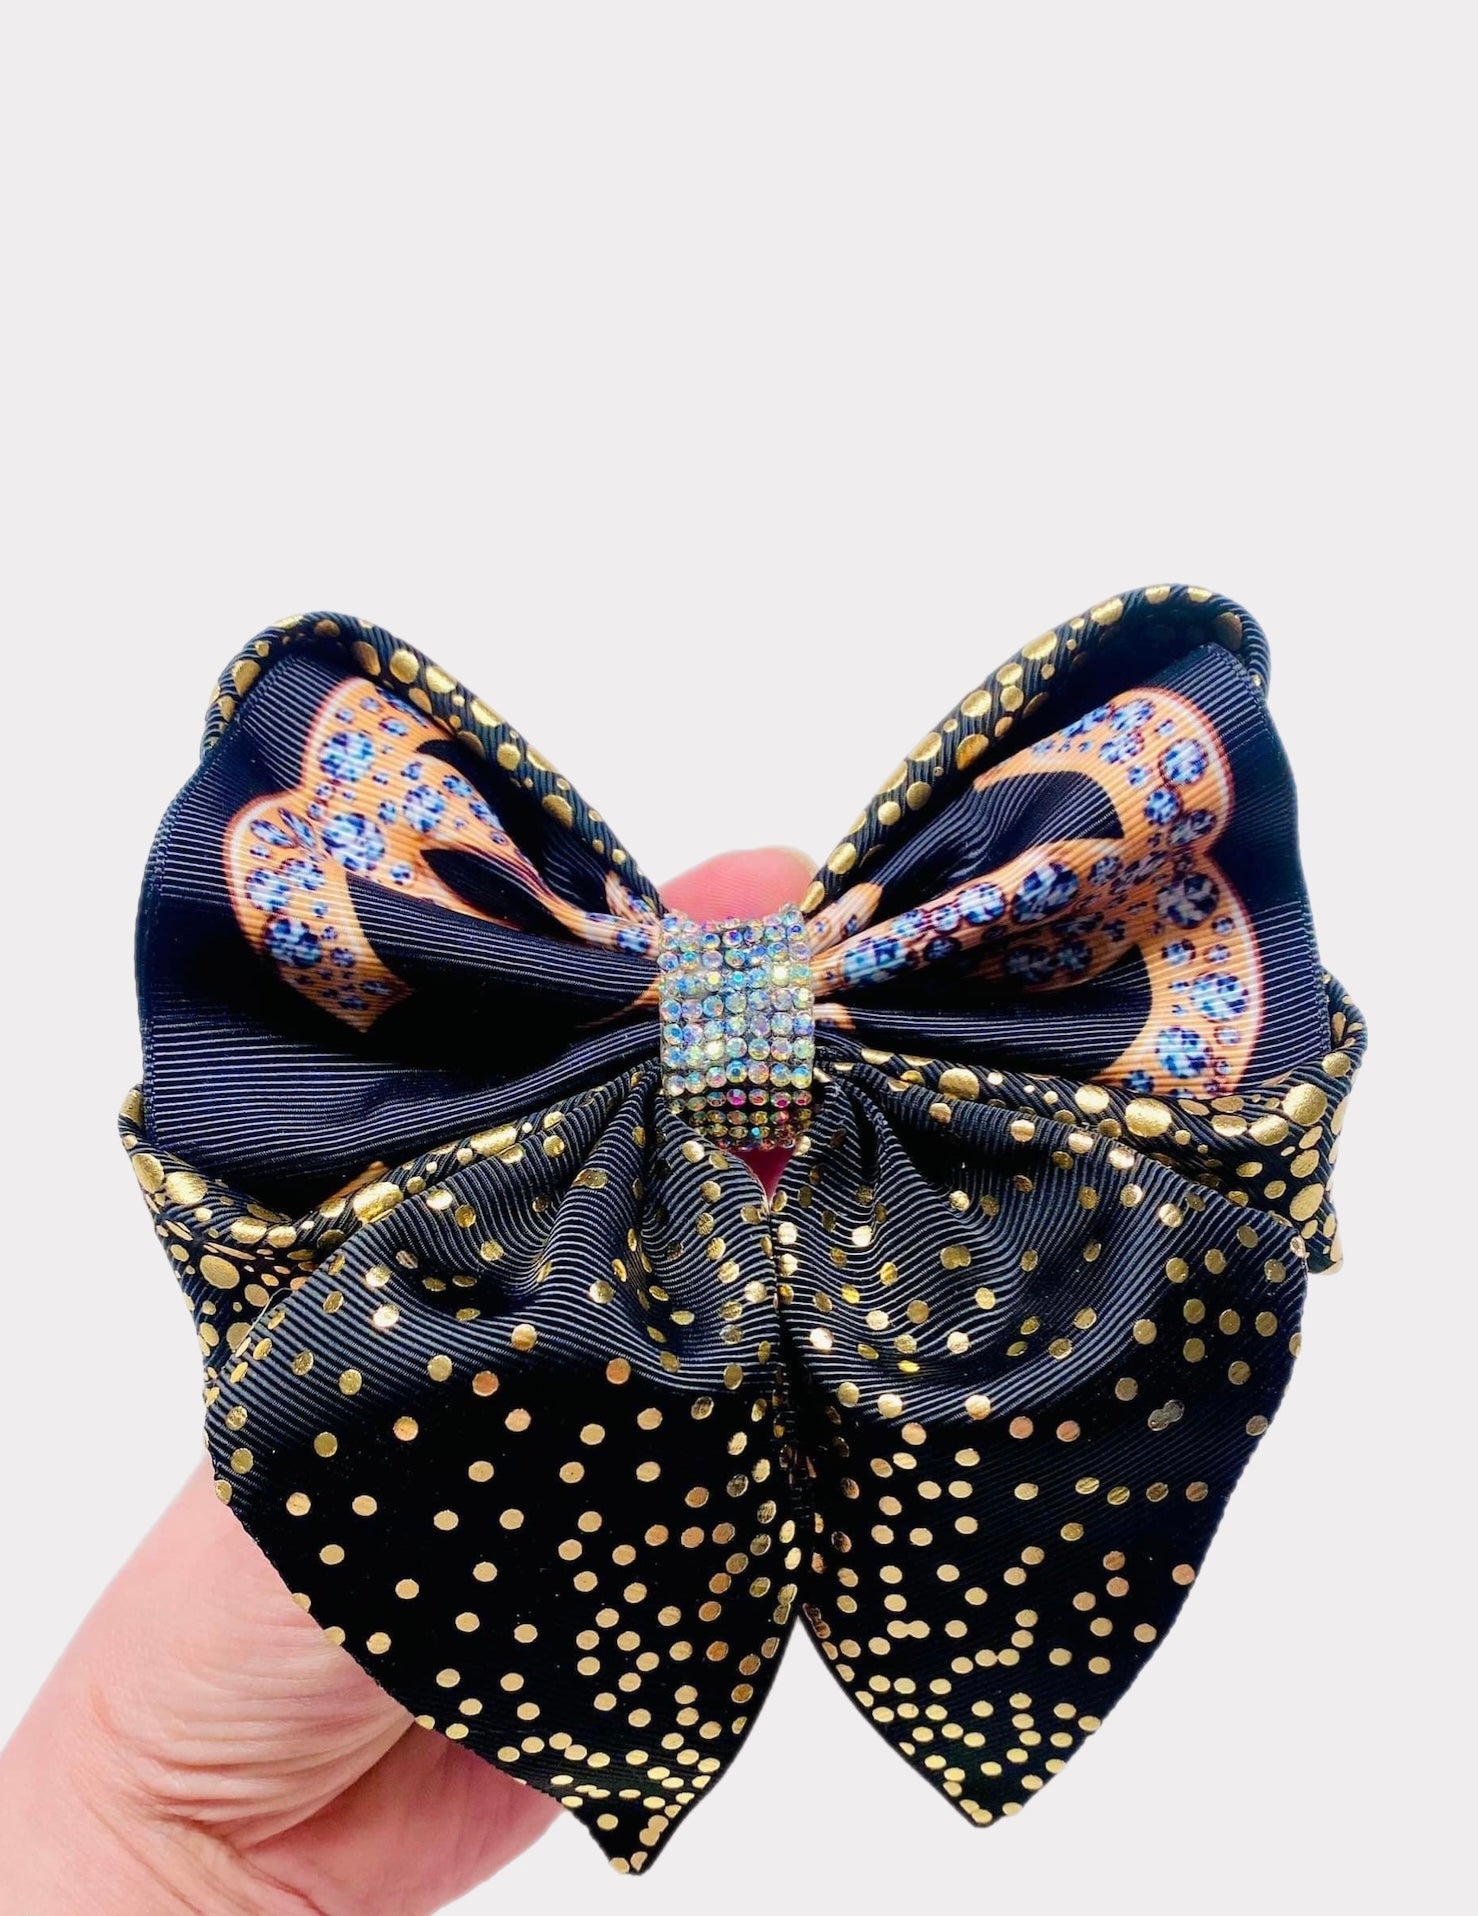 Black With Gold CC Fashion Hairbow / Cheer Bow!